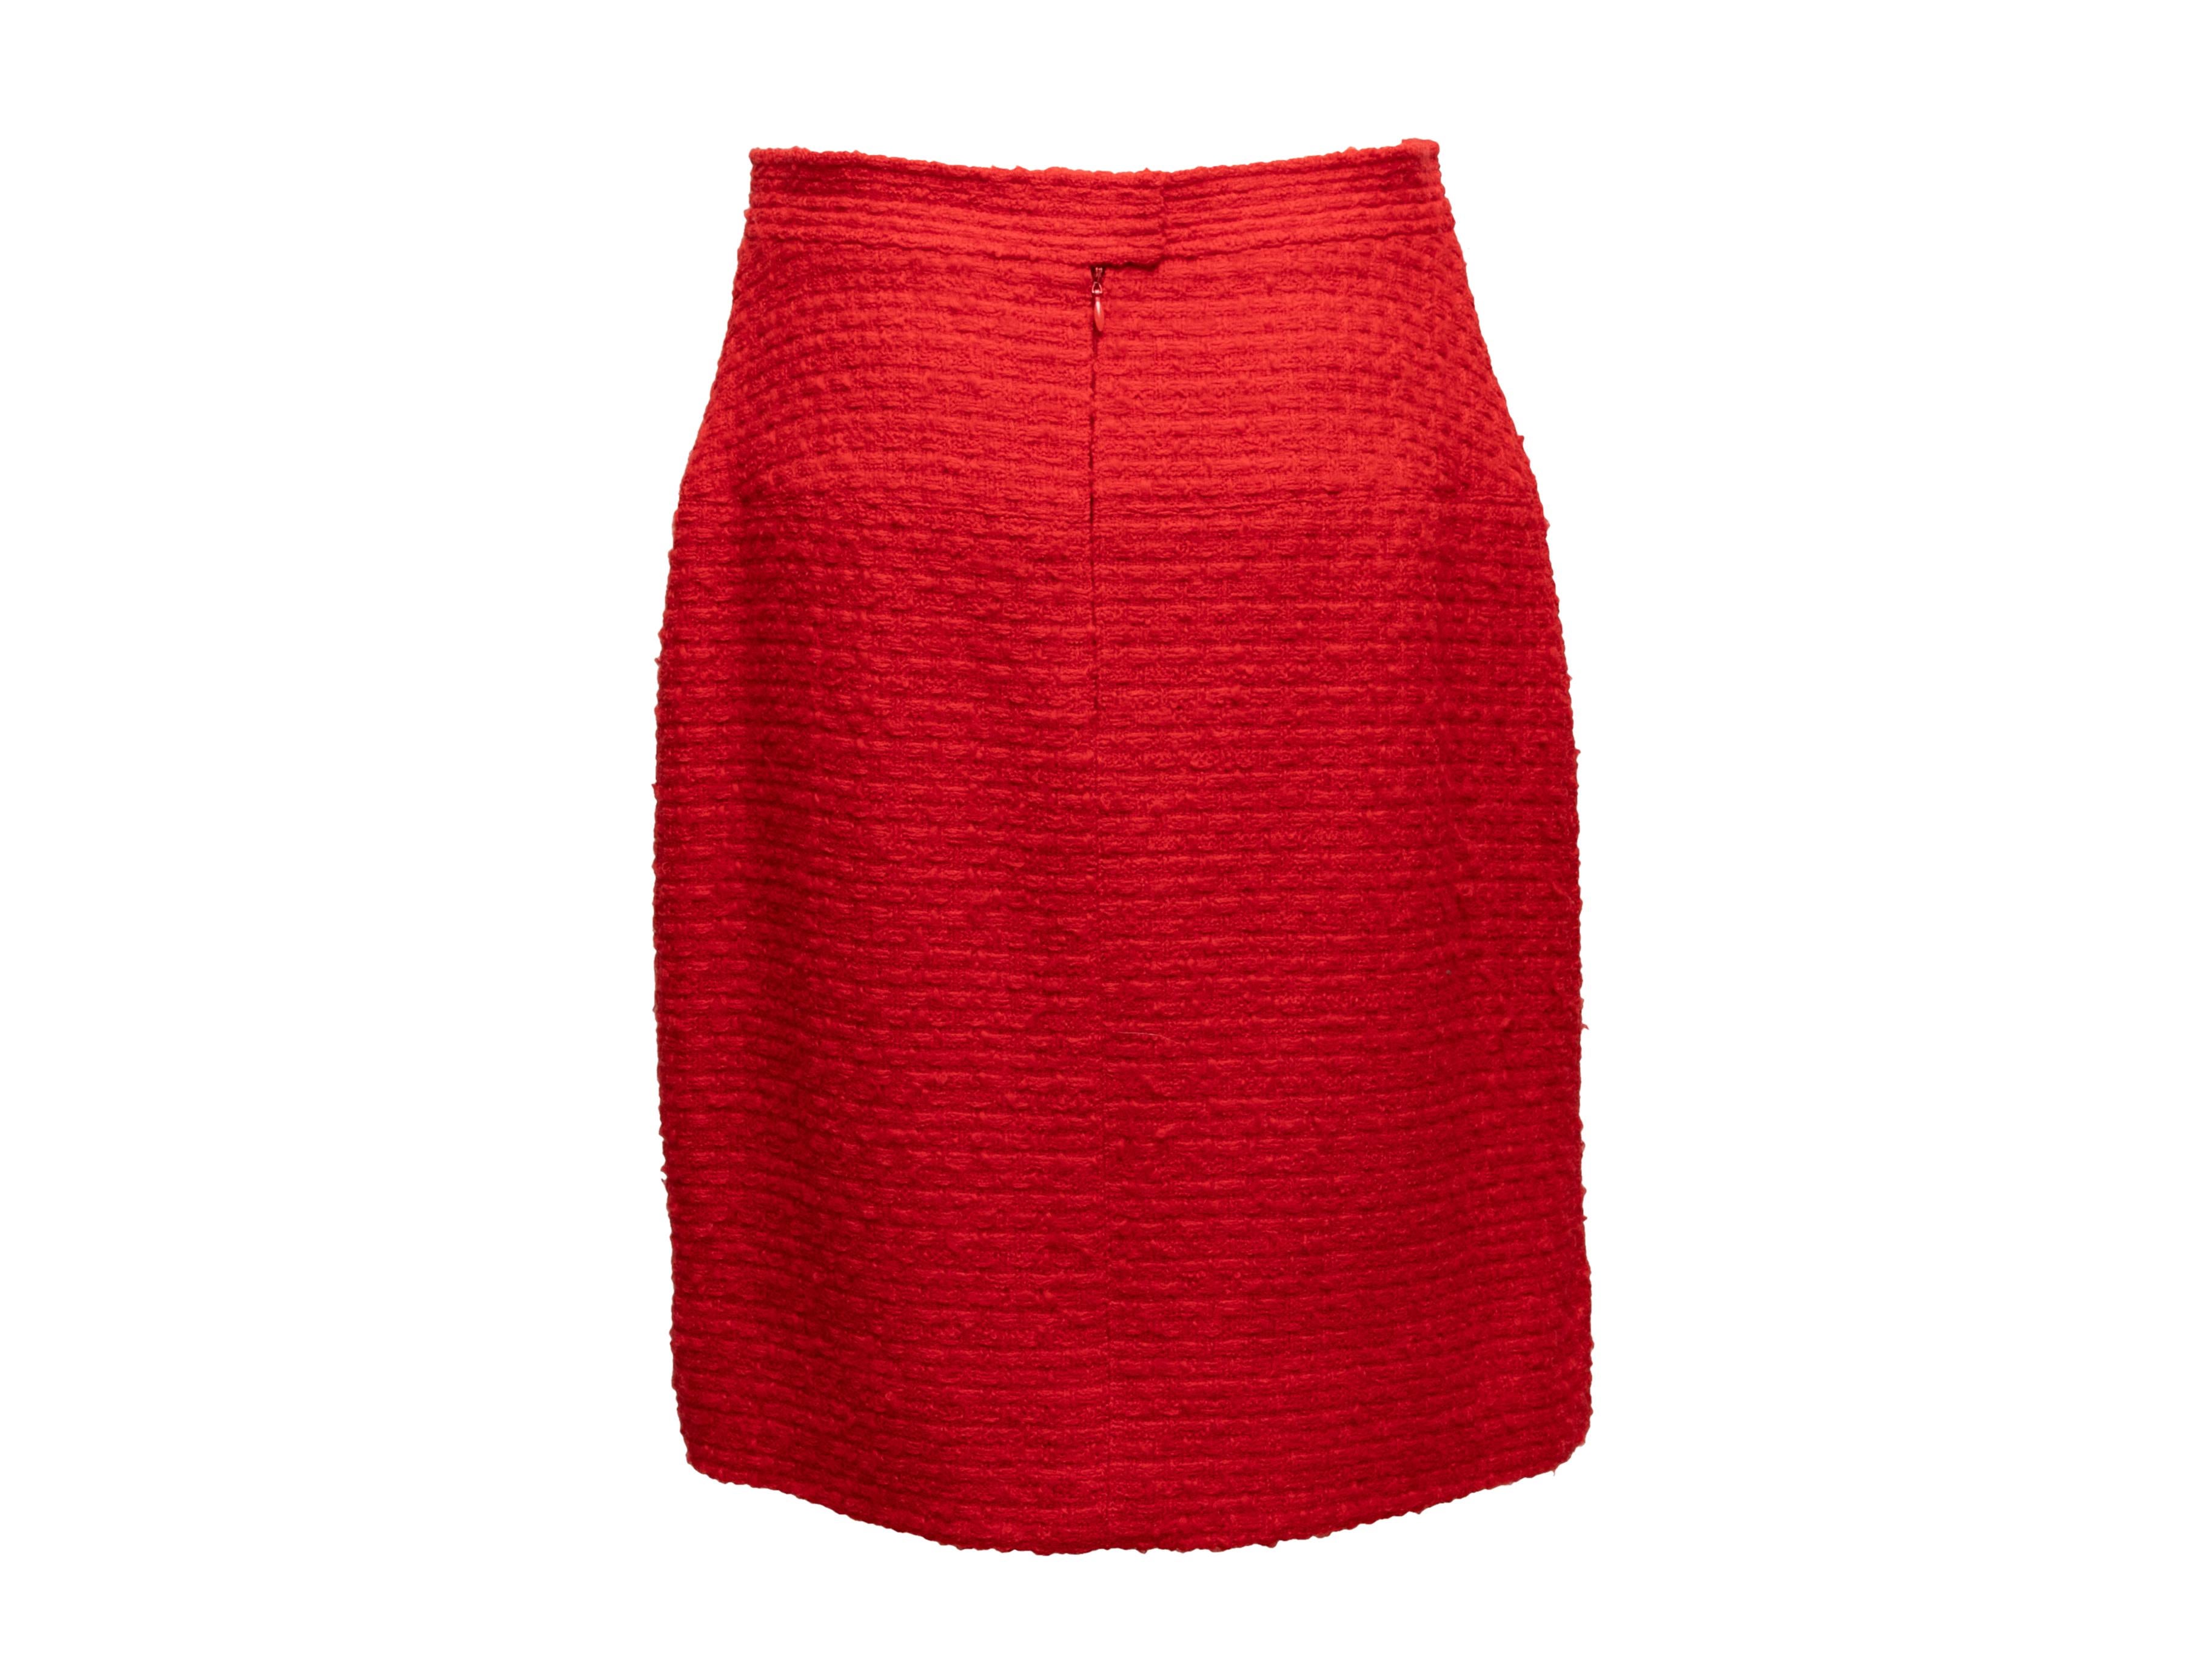 Women's Vintage Red Chanel Boutique Tweed Pencil Skirt Size S For Sale